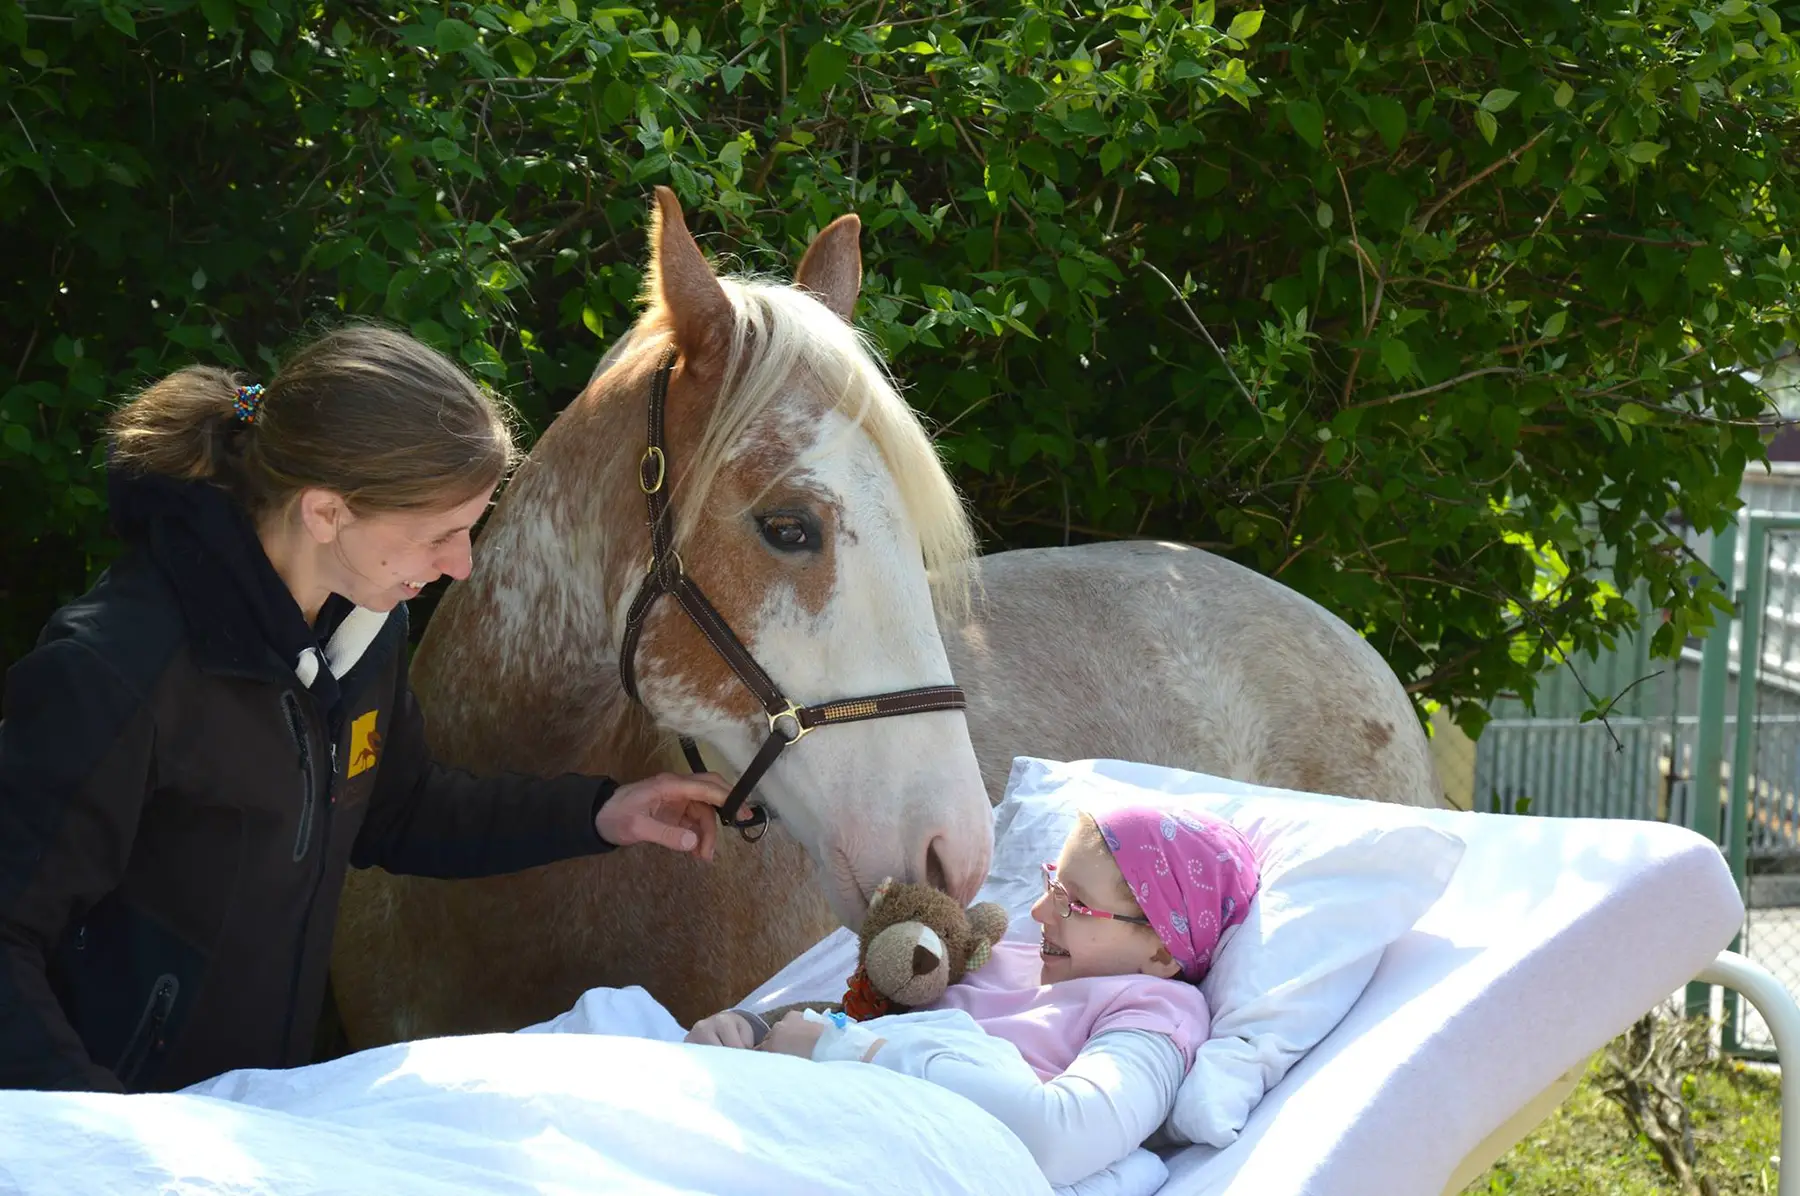 a young patient having a therapy session with a horse through the Lichtblickhof charity